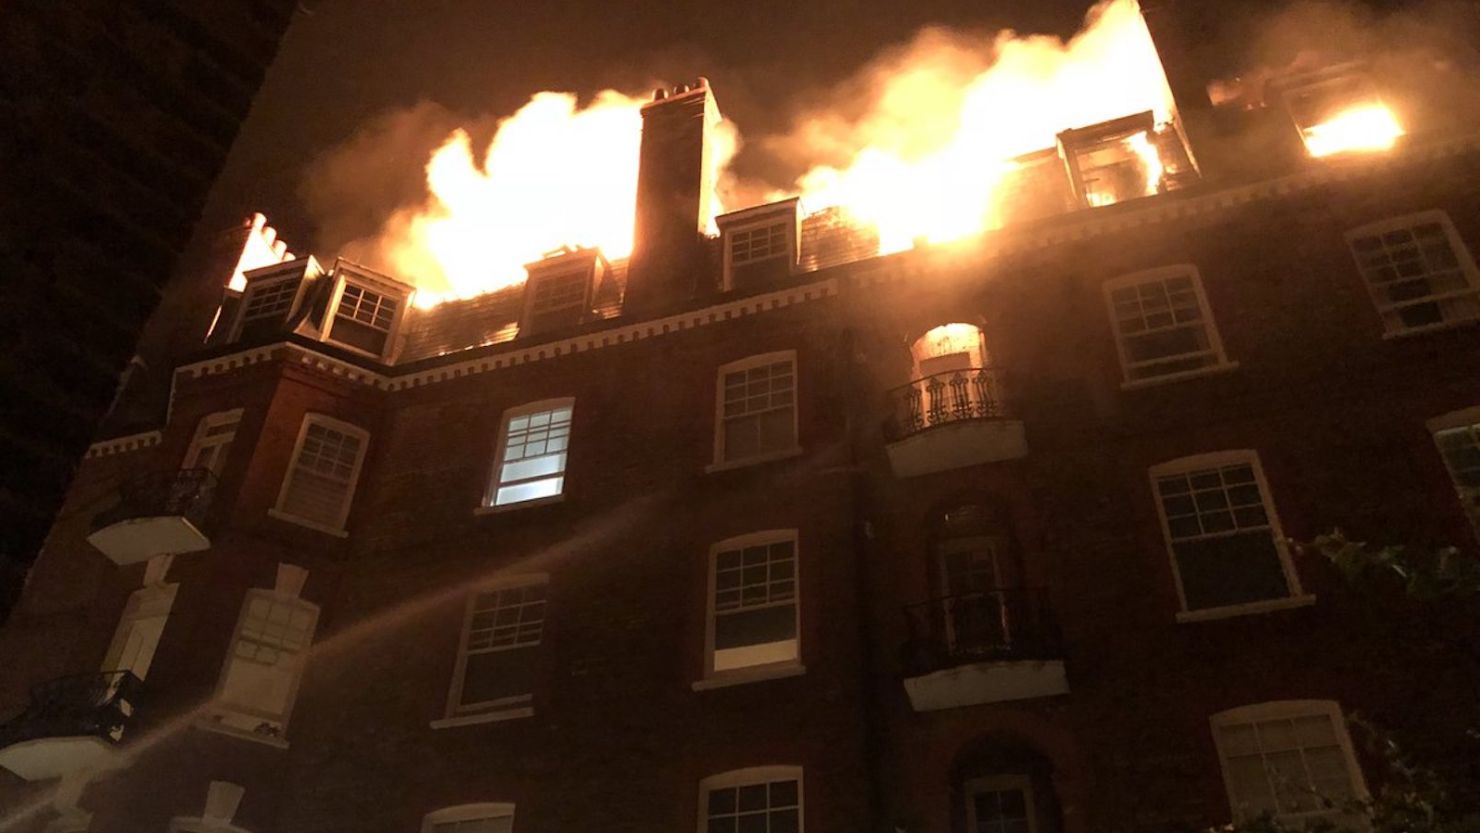 A fire broke out at an apartment building in northwest London in the early hours of July 26, 2018.